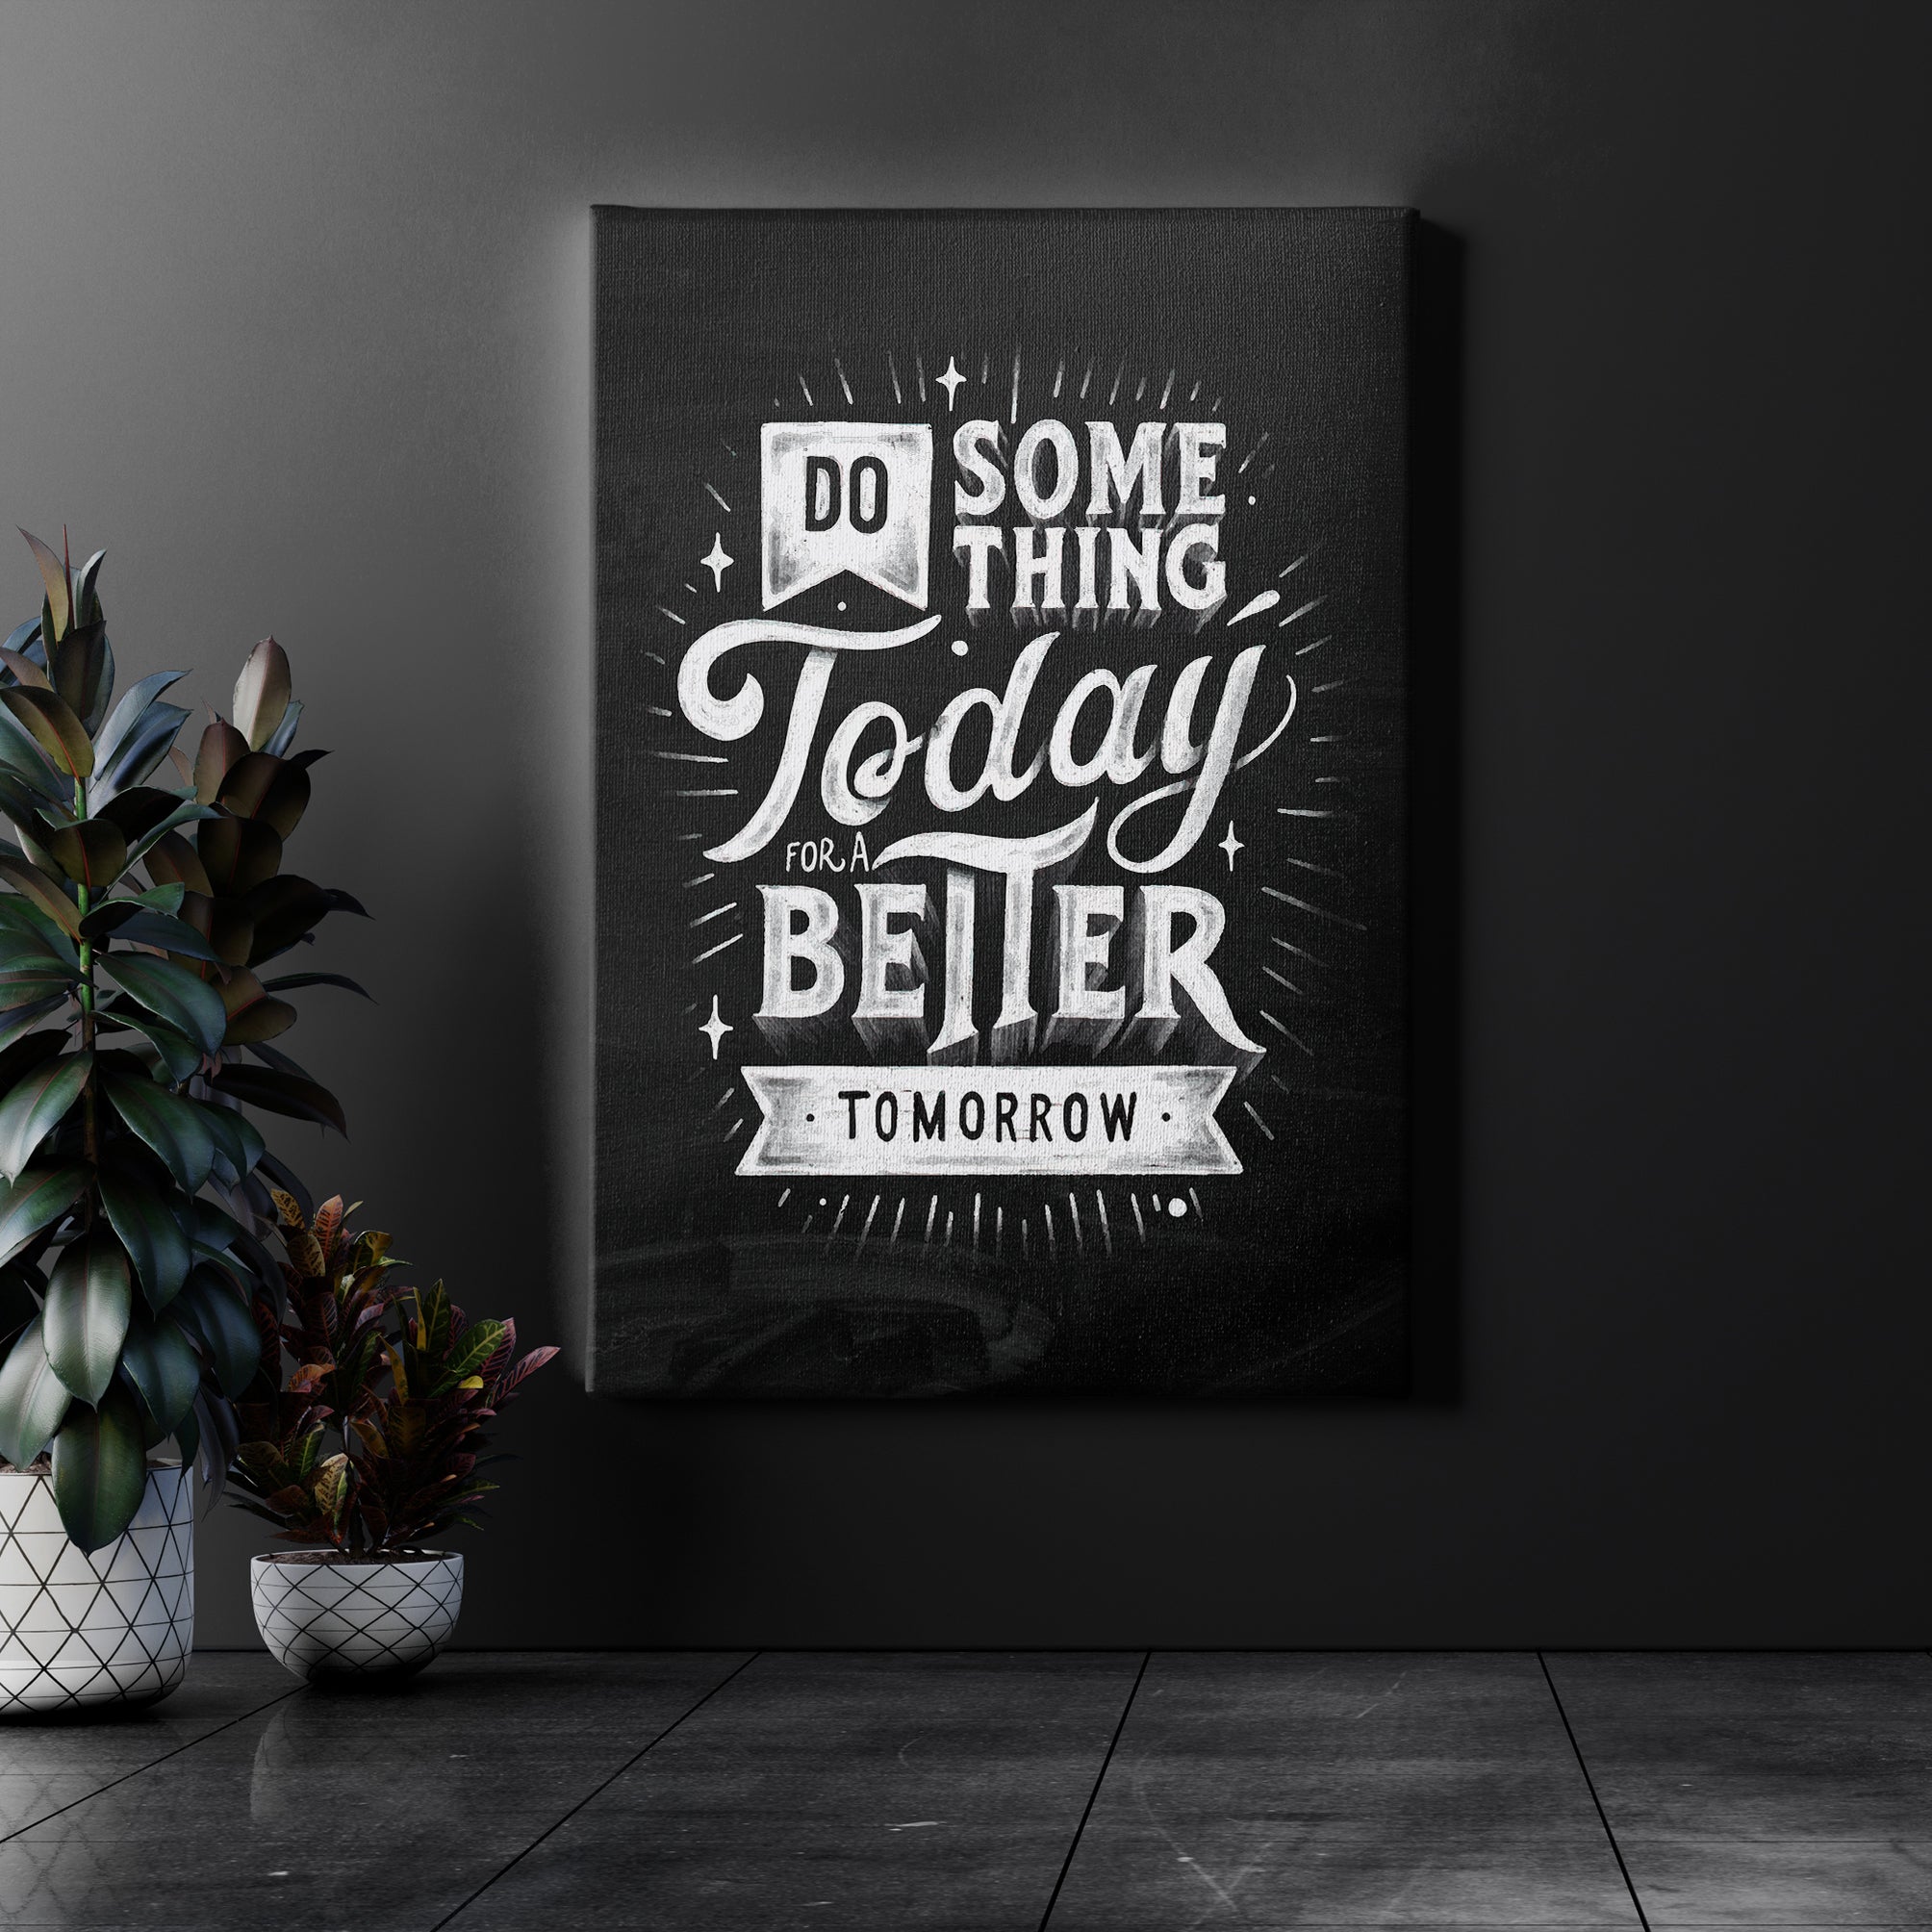 Do something today for a better tomorrow